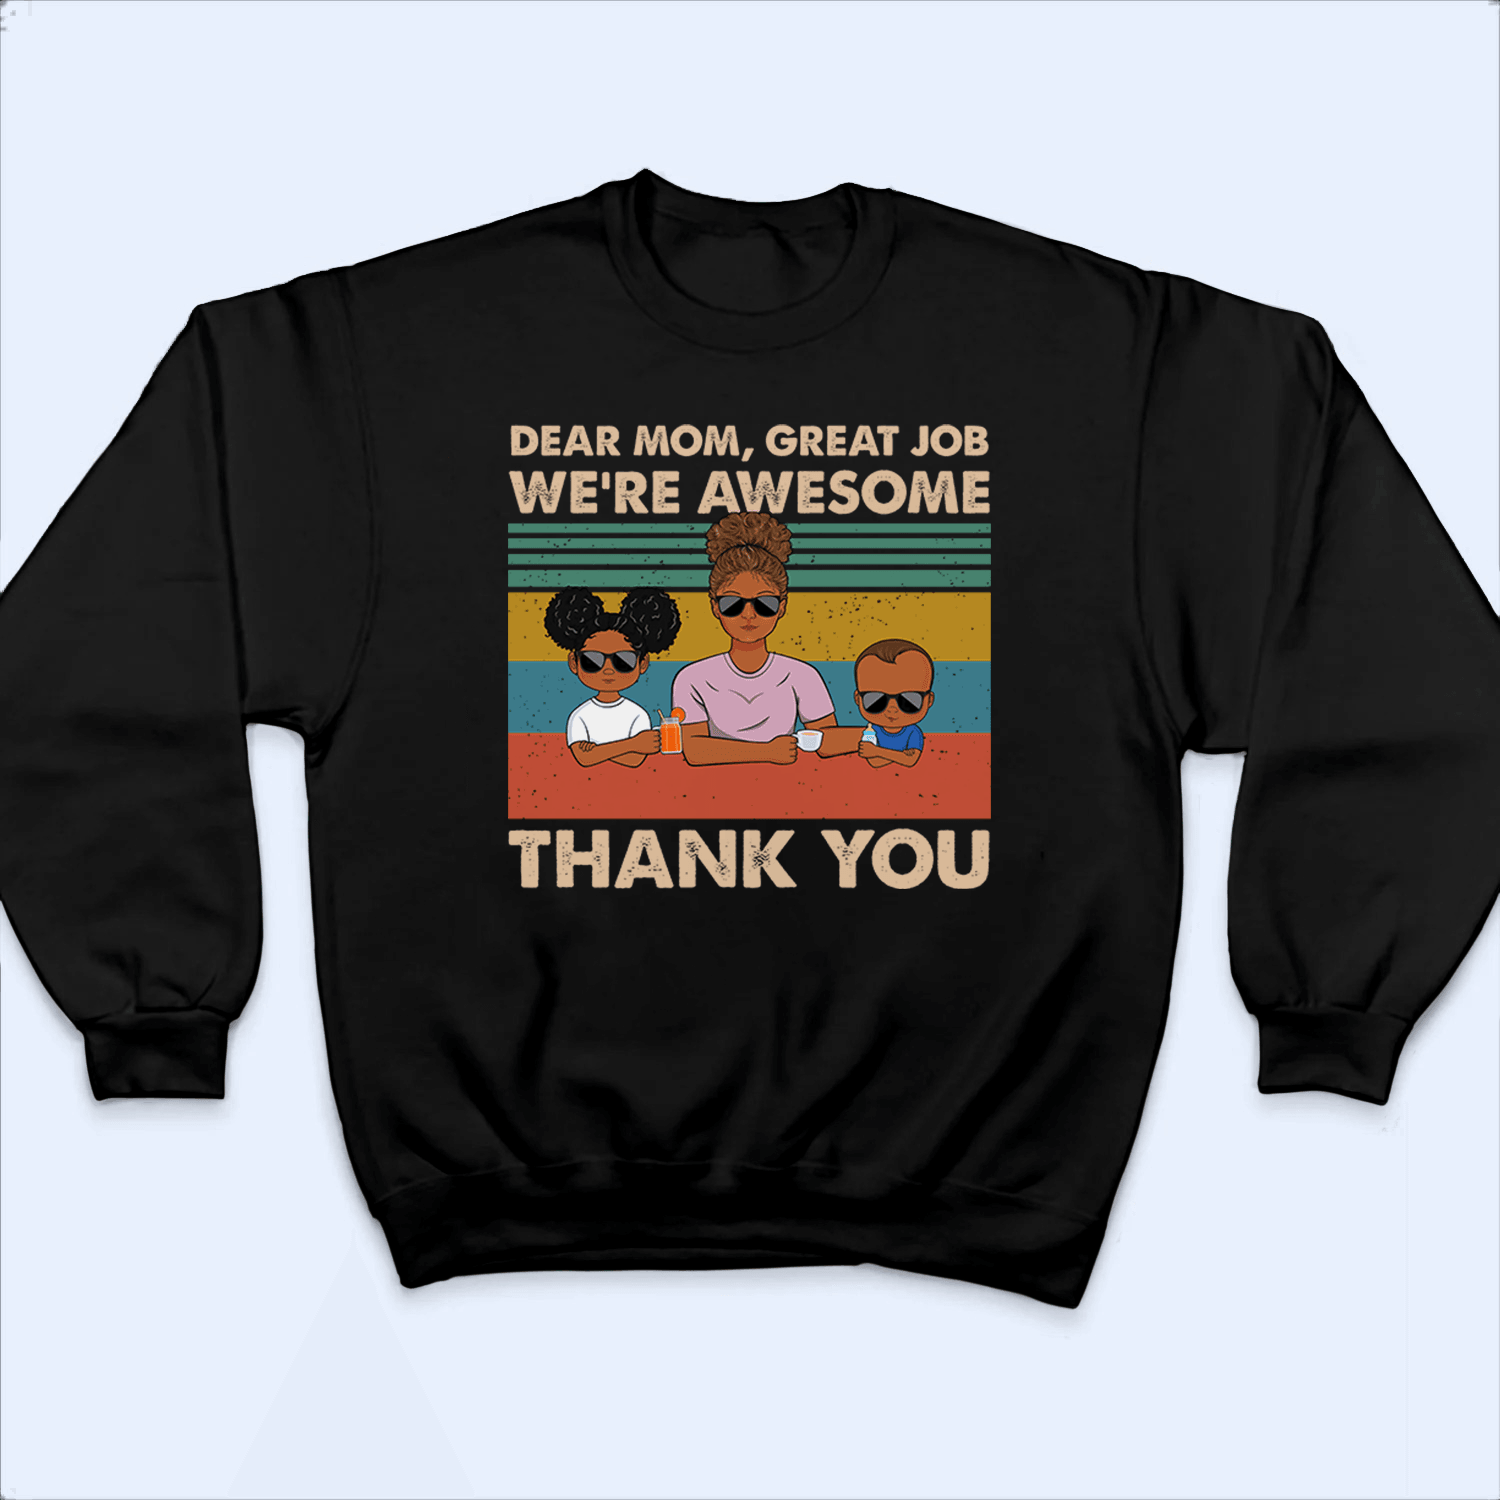 Dear Mom, Great Job We're Awesome Thank You - Personalized Custom T-Shirt - Gift For Mom, Mother, Grandma, Grandmother, Mother's Day